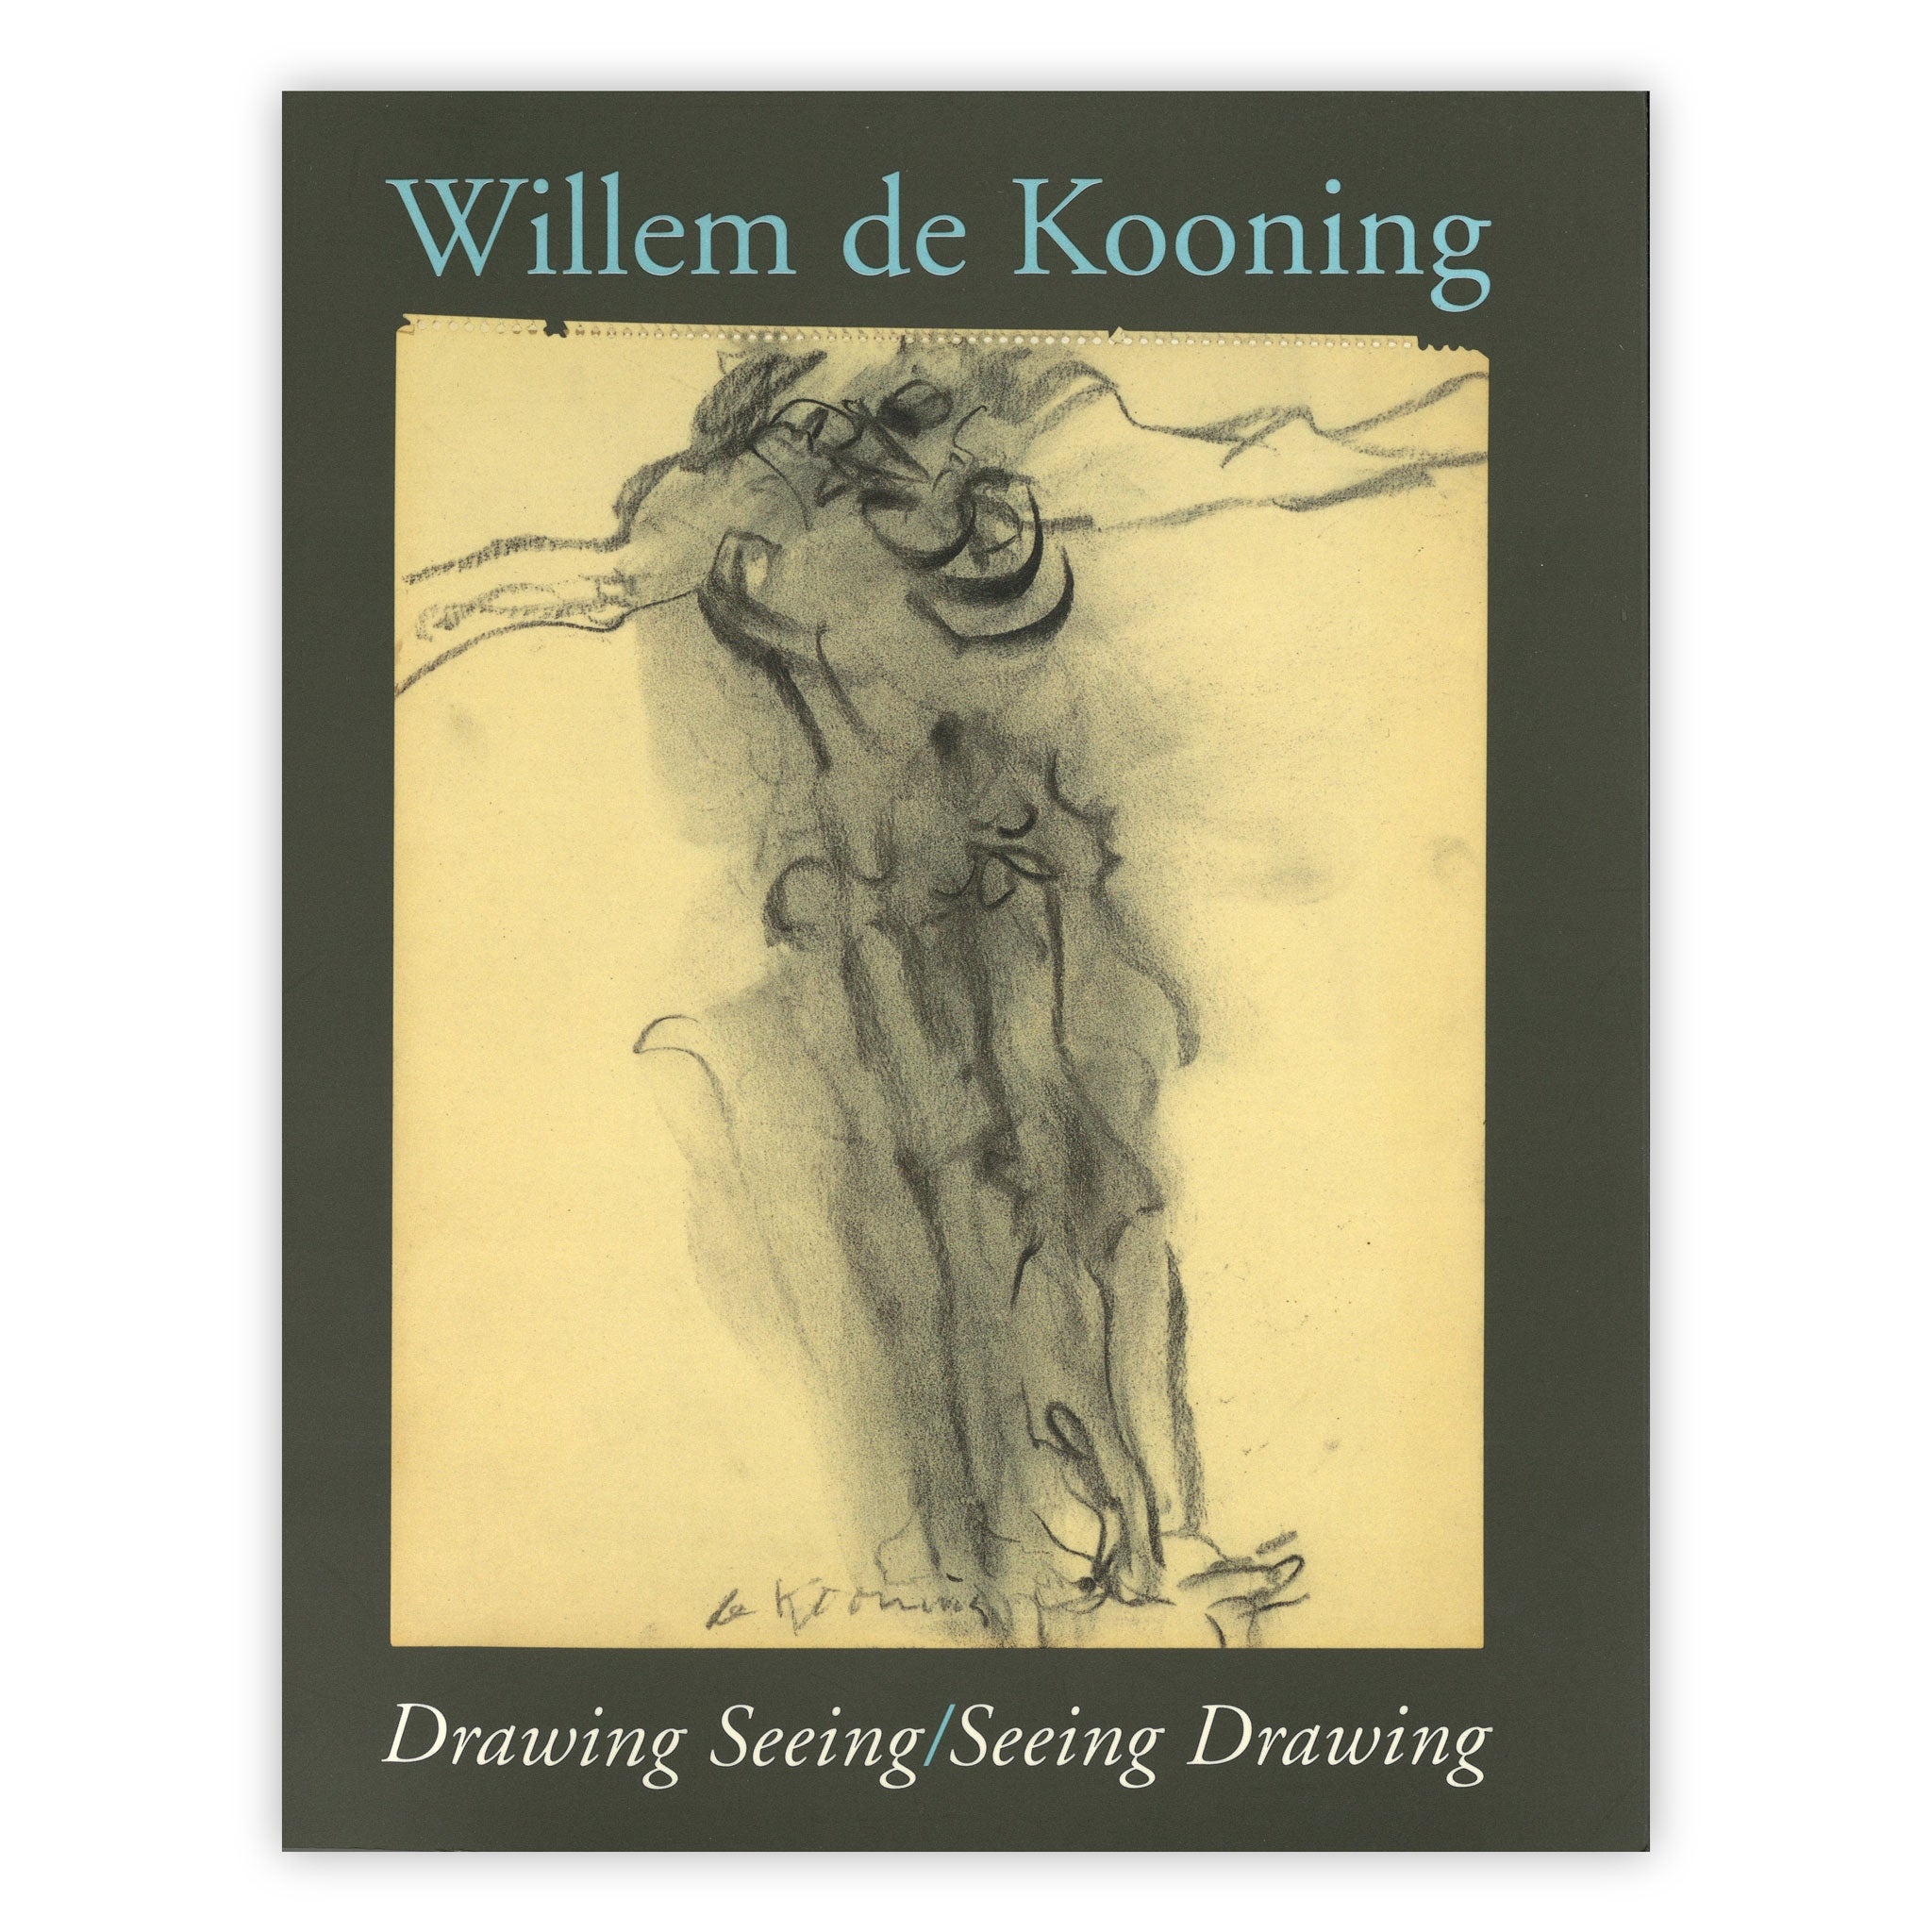 Front cover for "Willem De Kooning: Drawing Seeing/Seeing Drawing"